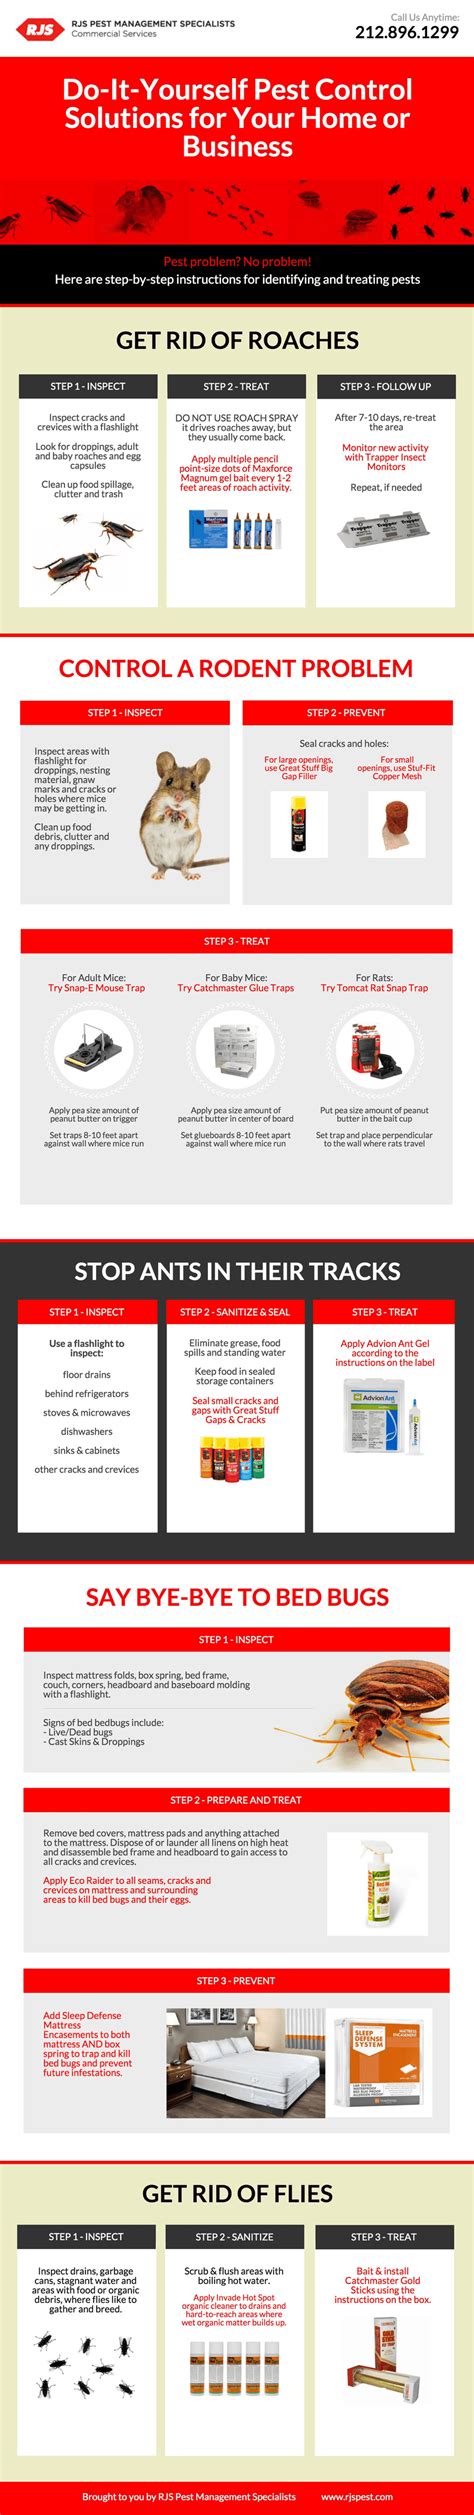 Use baits, sprays, insecticides, dusts for killing ants. Do It Yourself Pest Control For Home & Office ...